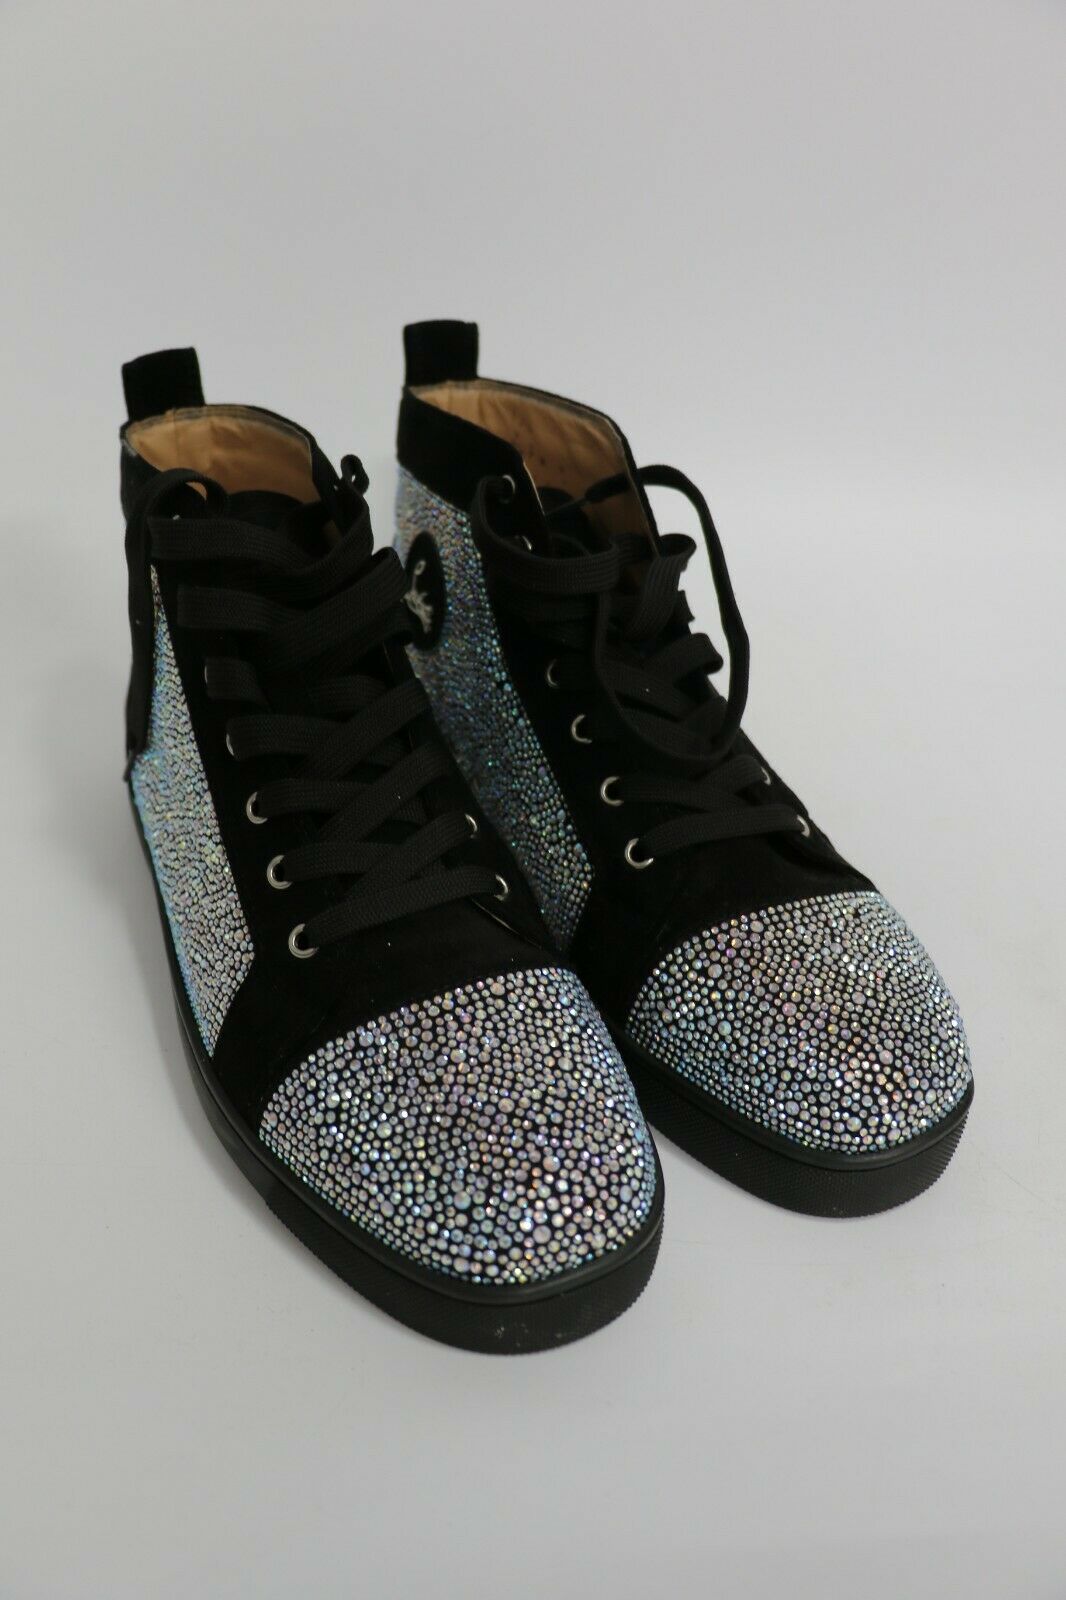 Christian Louboutin: Mens Strass Shoes Swarovski | Red Sole | Size 